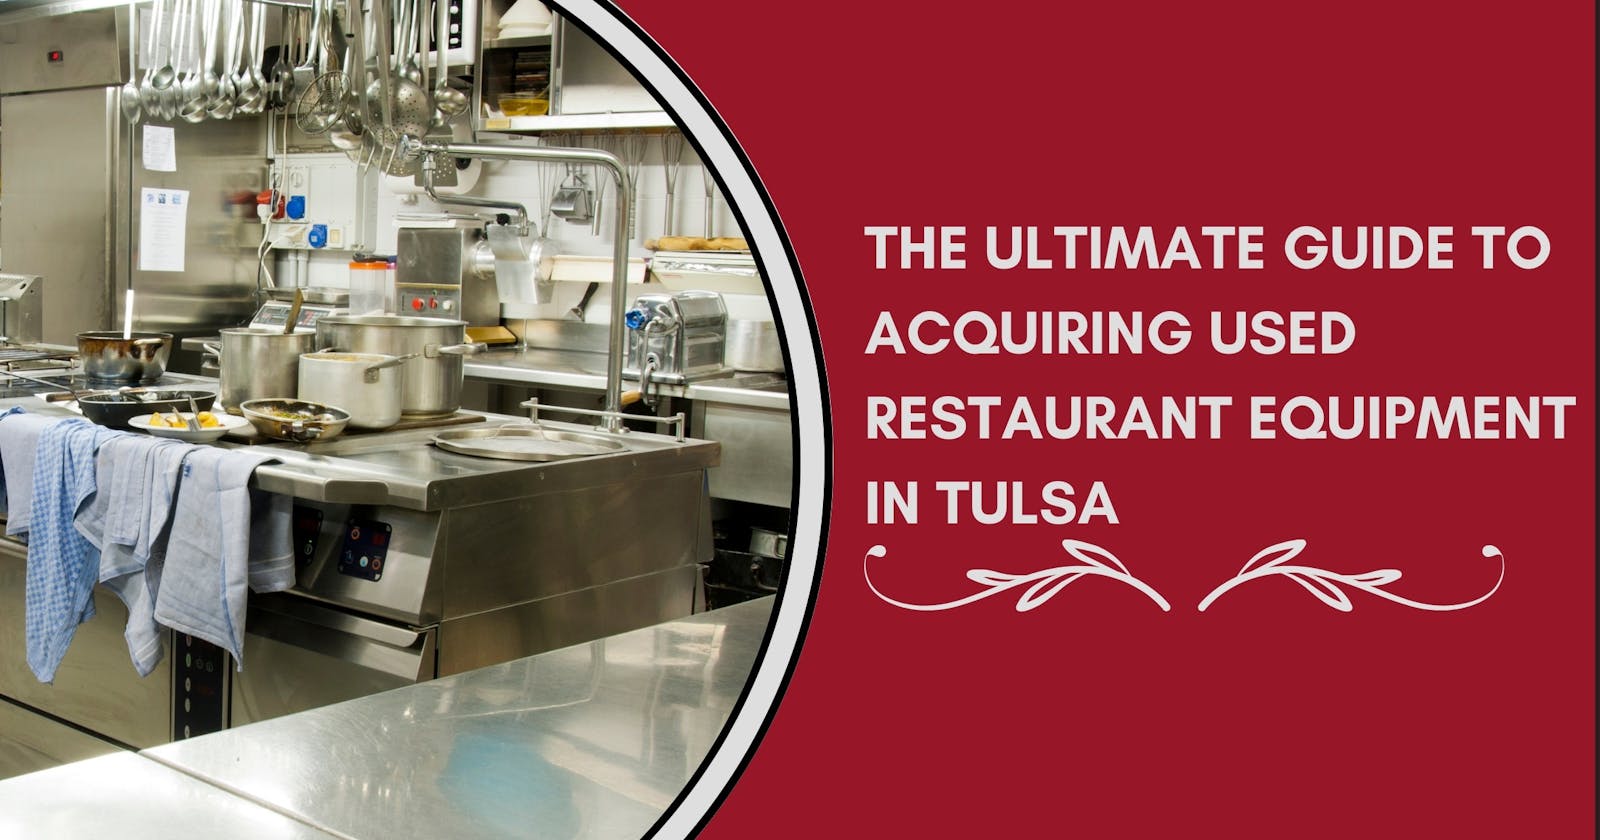 The Ultimate Guide to Acquiring Used Restaurant Equipment in Tulsa